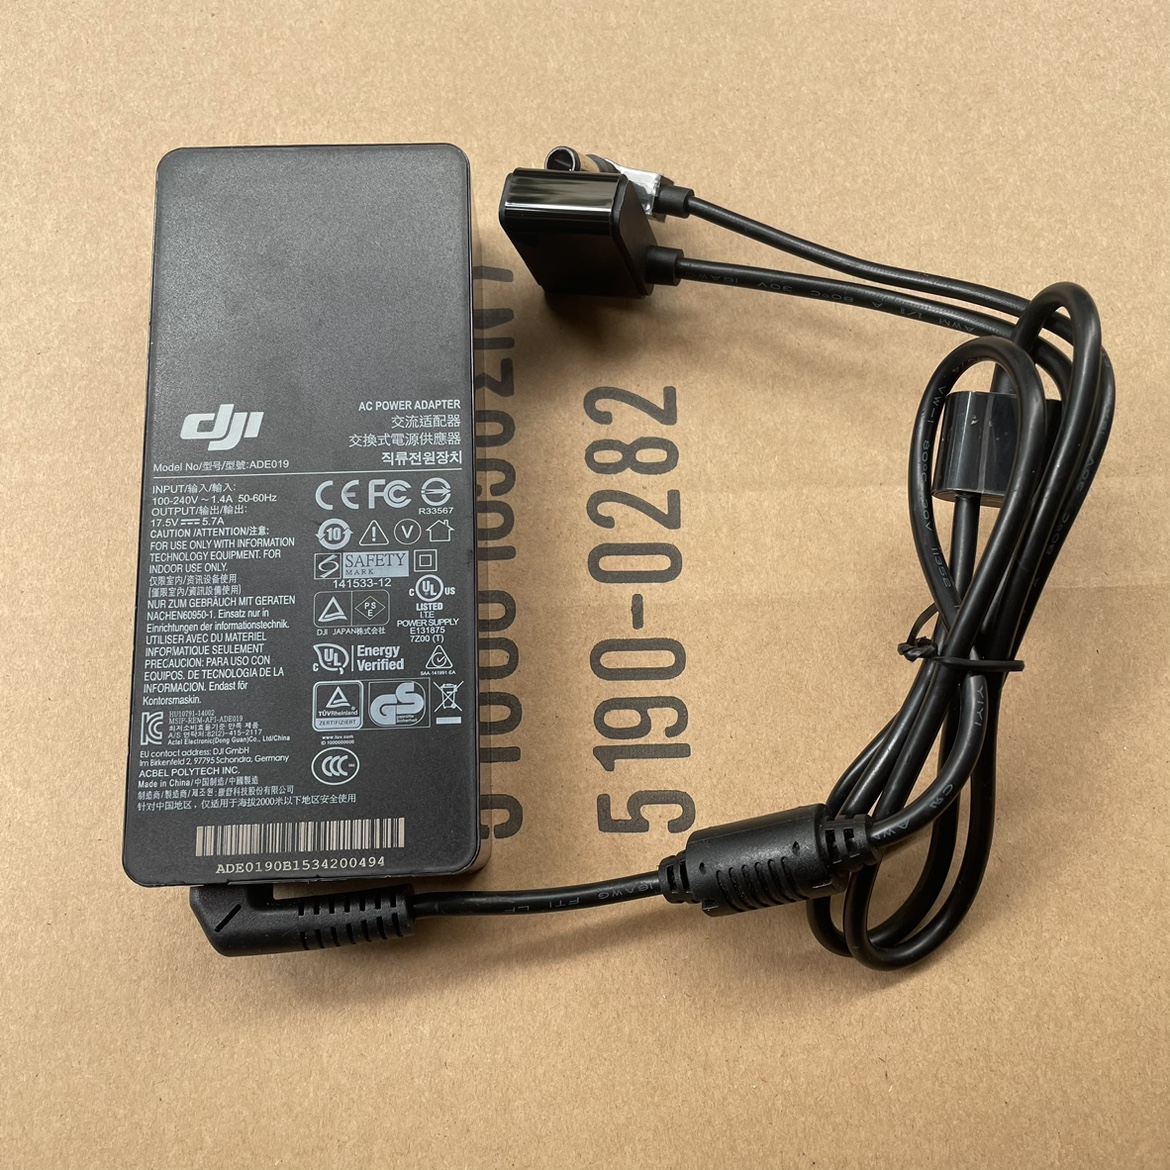 ADE019 3SE 3P 3A 3S AC POWER ADAPTER 100W NEW